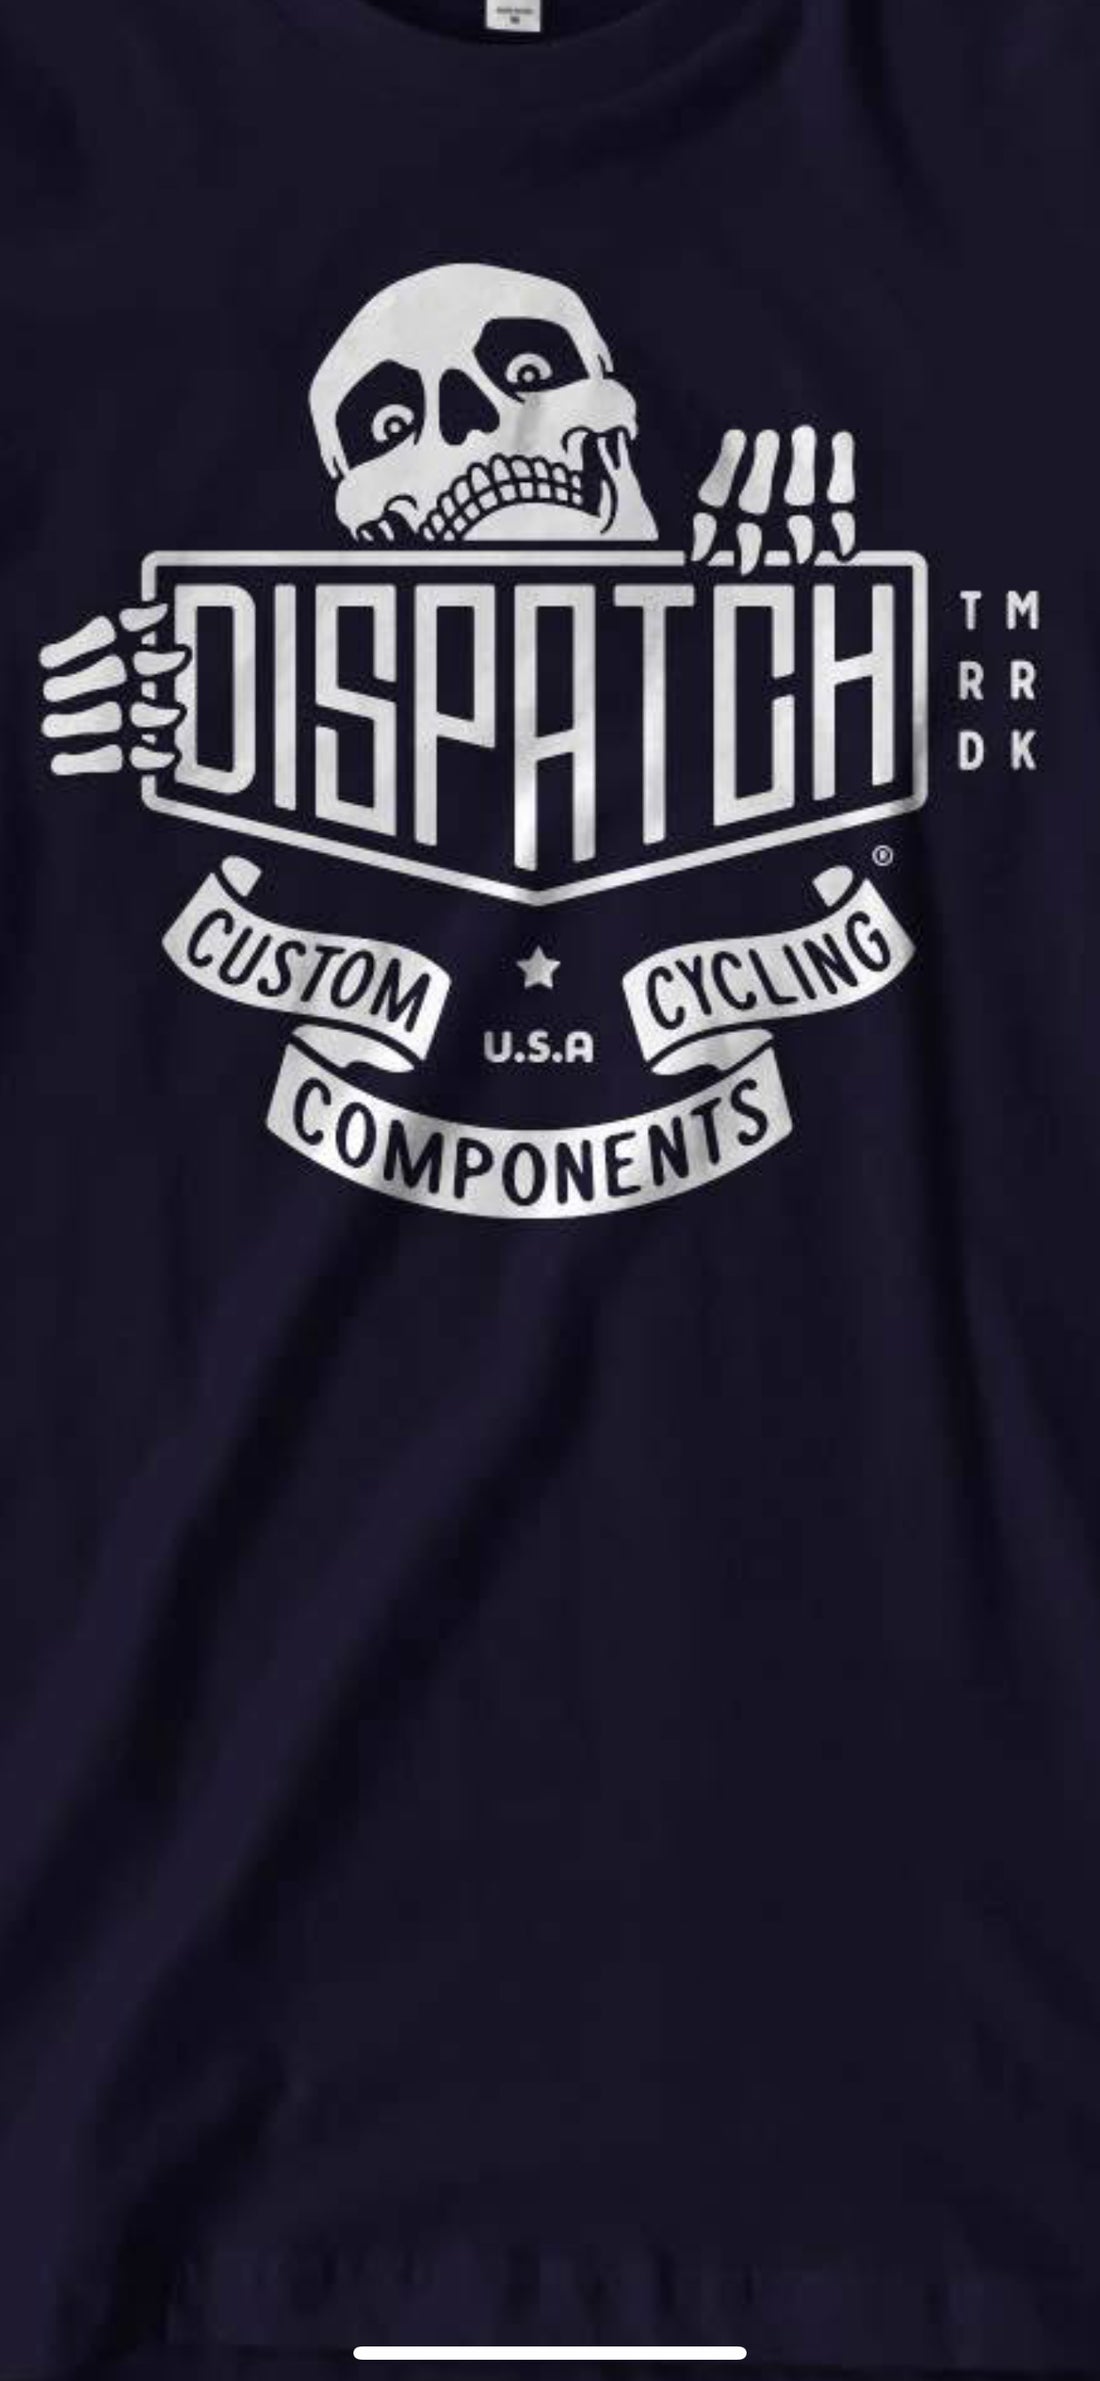 Dispatch Skeleton Logo T-Shirts Are Coming